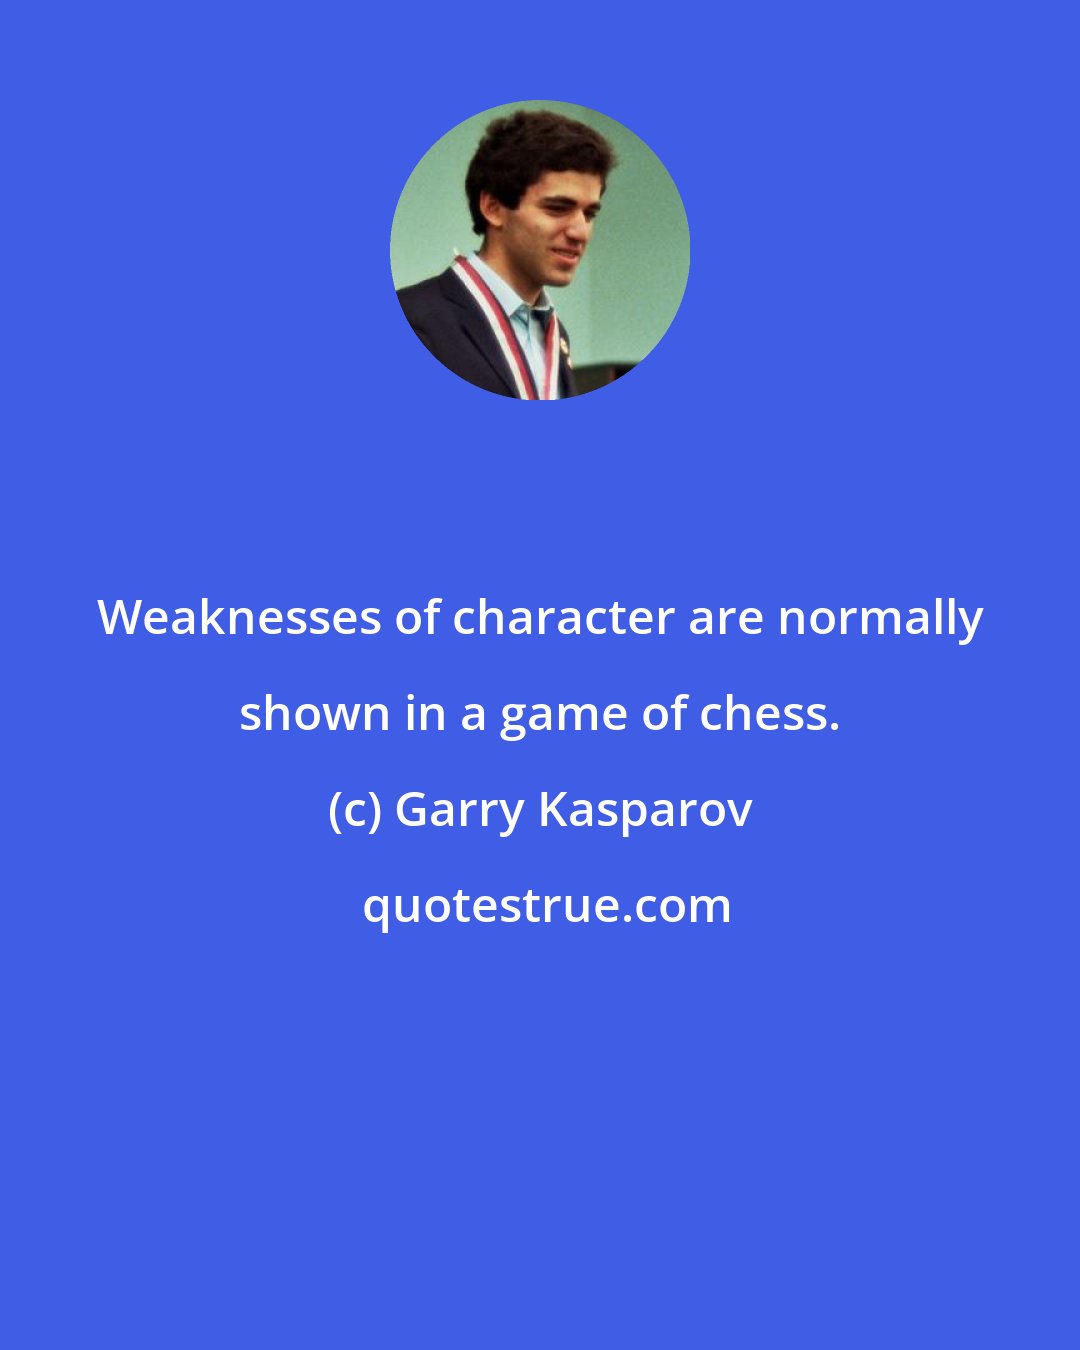 Garry Kasparov: Weaknesses of character are normally shown in a game of chess.